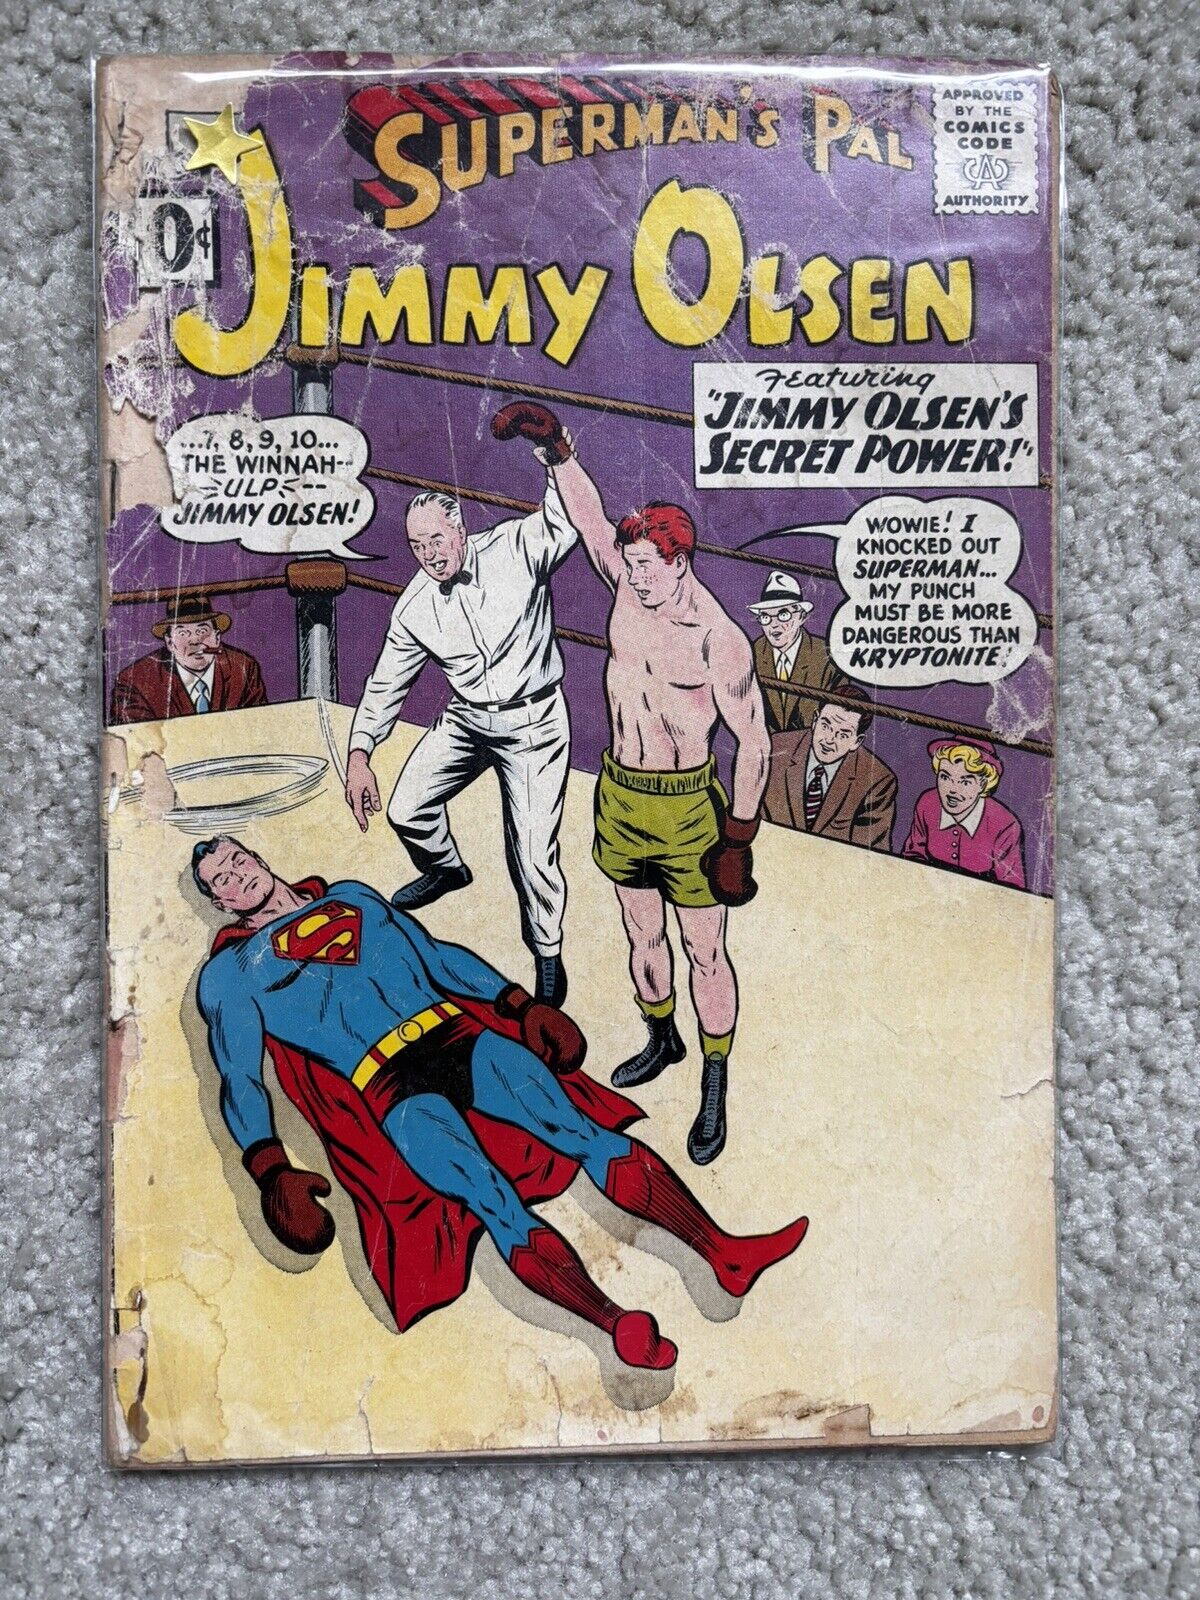 Superman’s Pal Jimmy Olsen #55 - 1961 - Ungraded - Combined Shipping